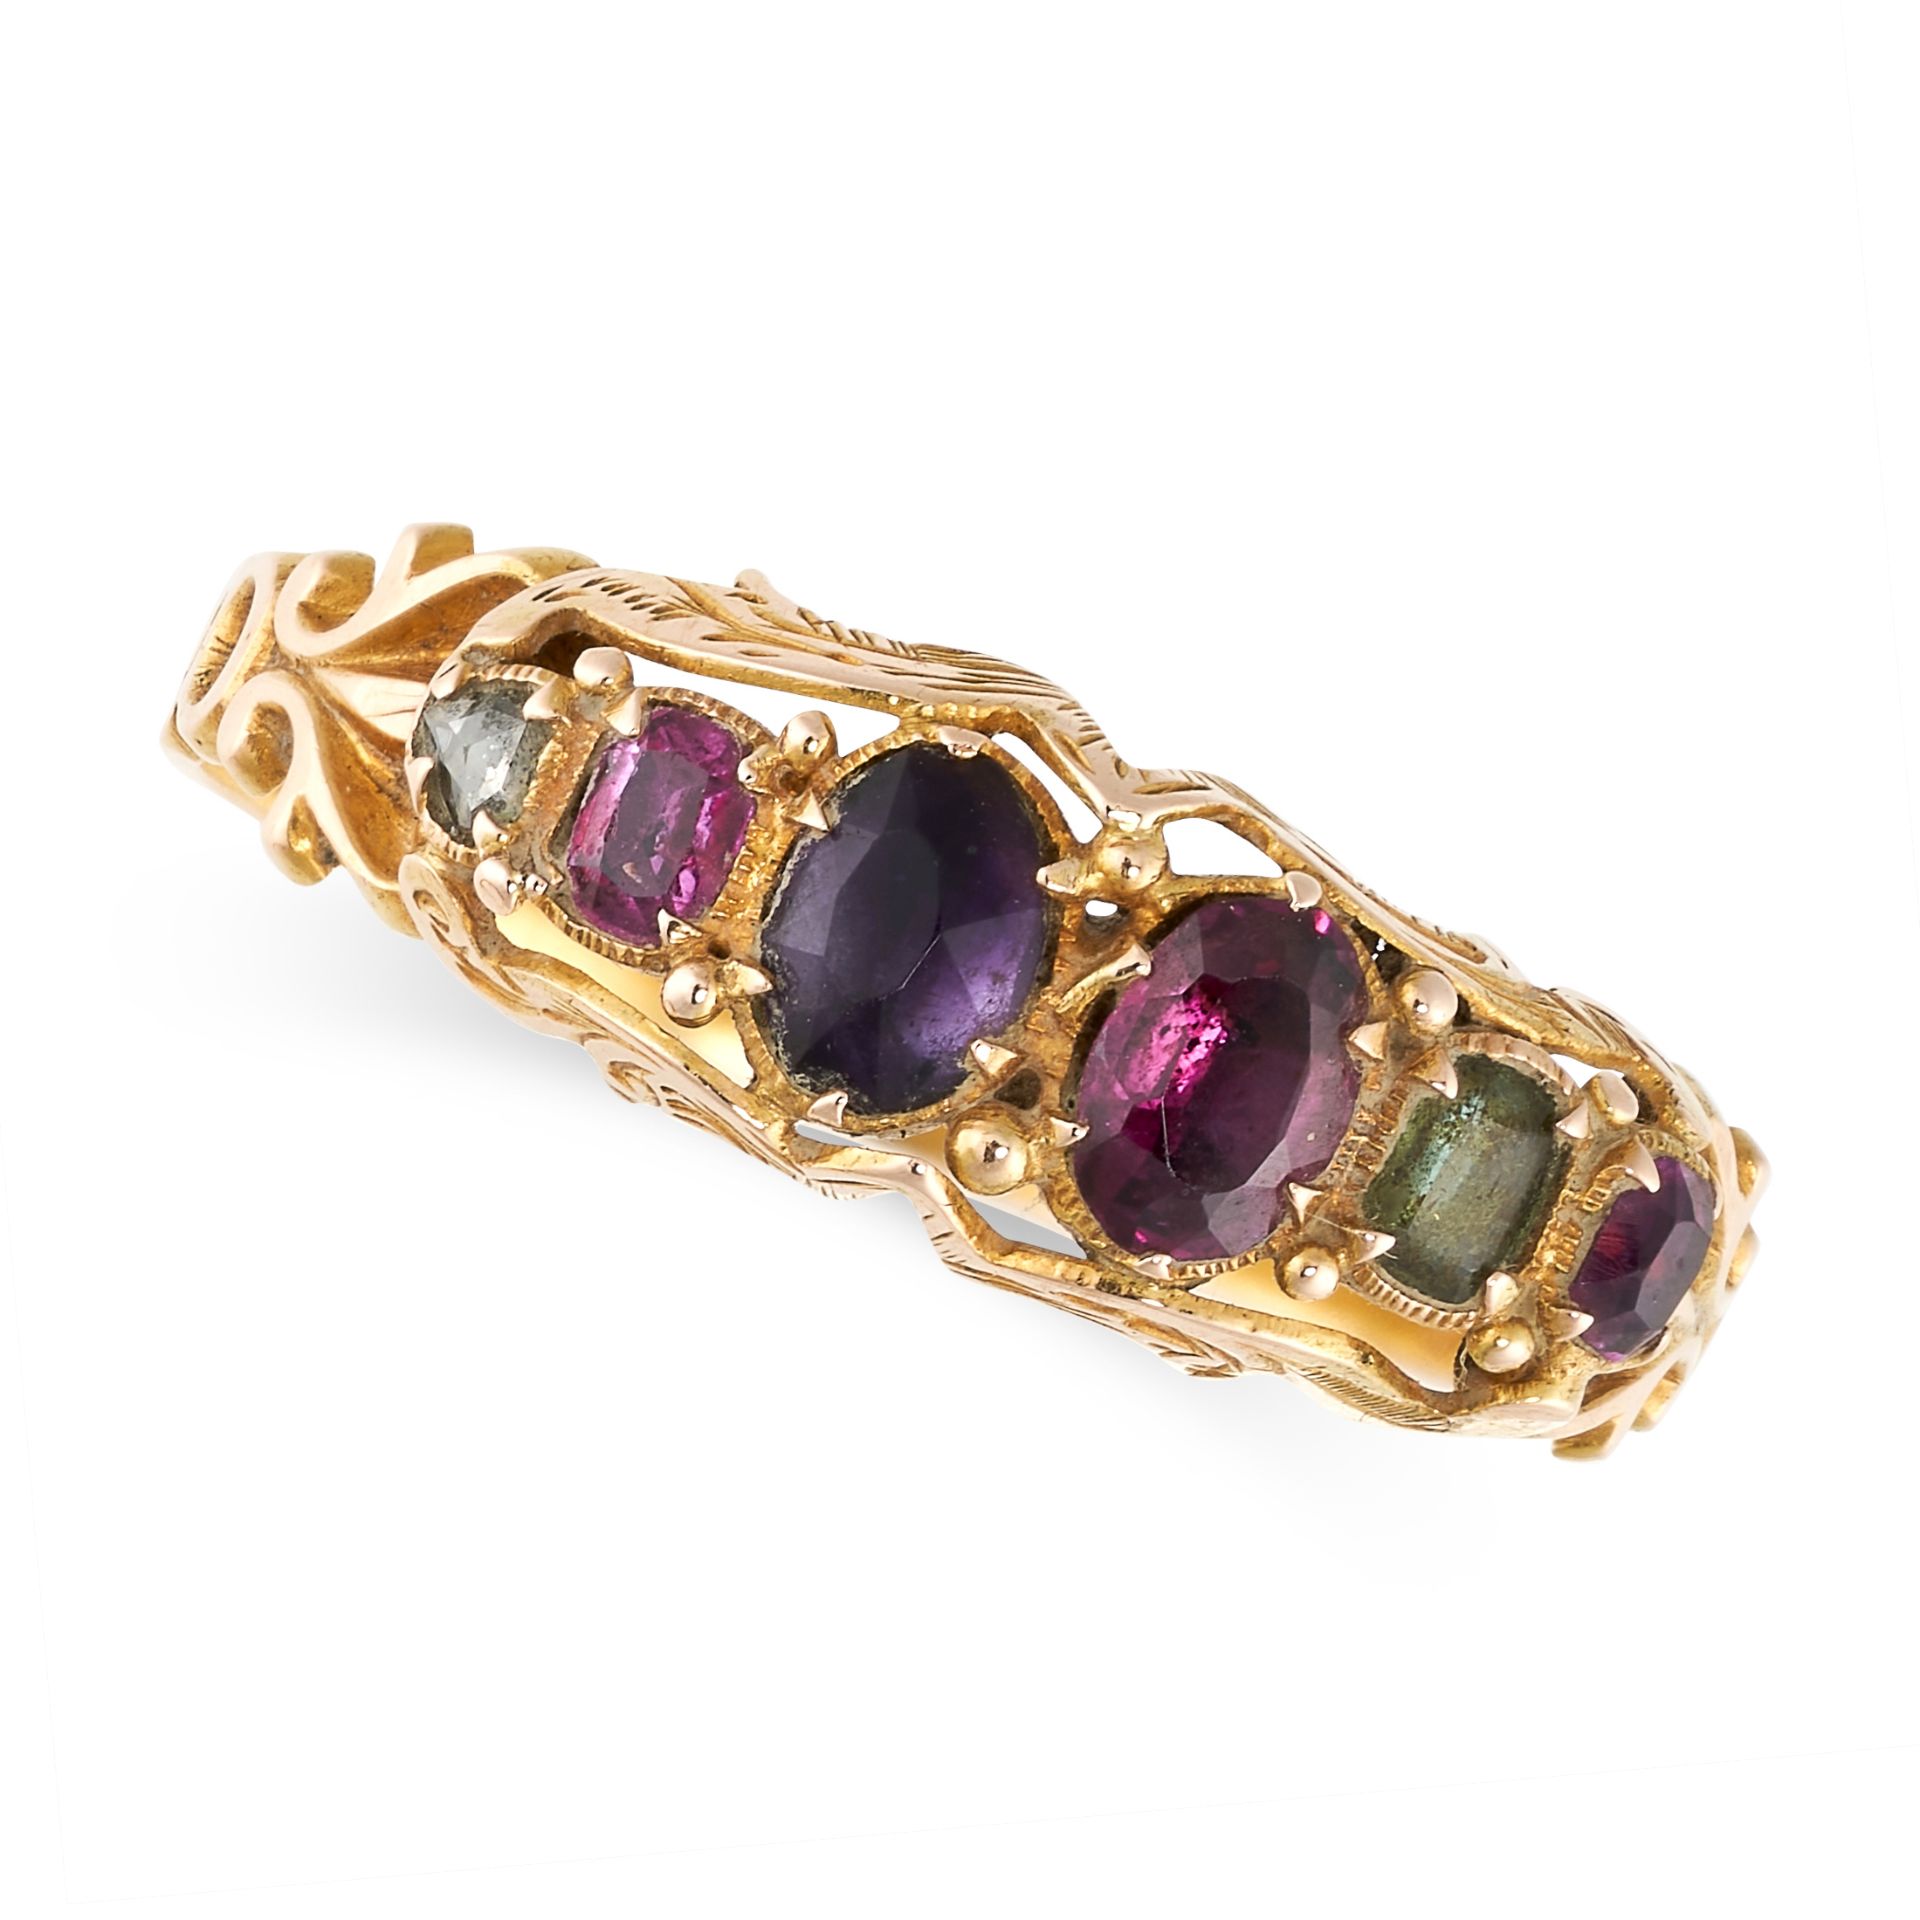 NO RESERVE - AN ANTIQUE VICTORIAN GEMSET REGARD RING, 19TH CENTURY in yellow gold, set with a row of